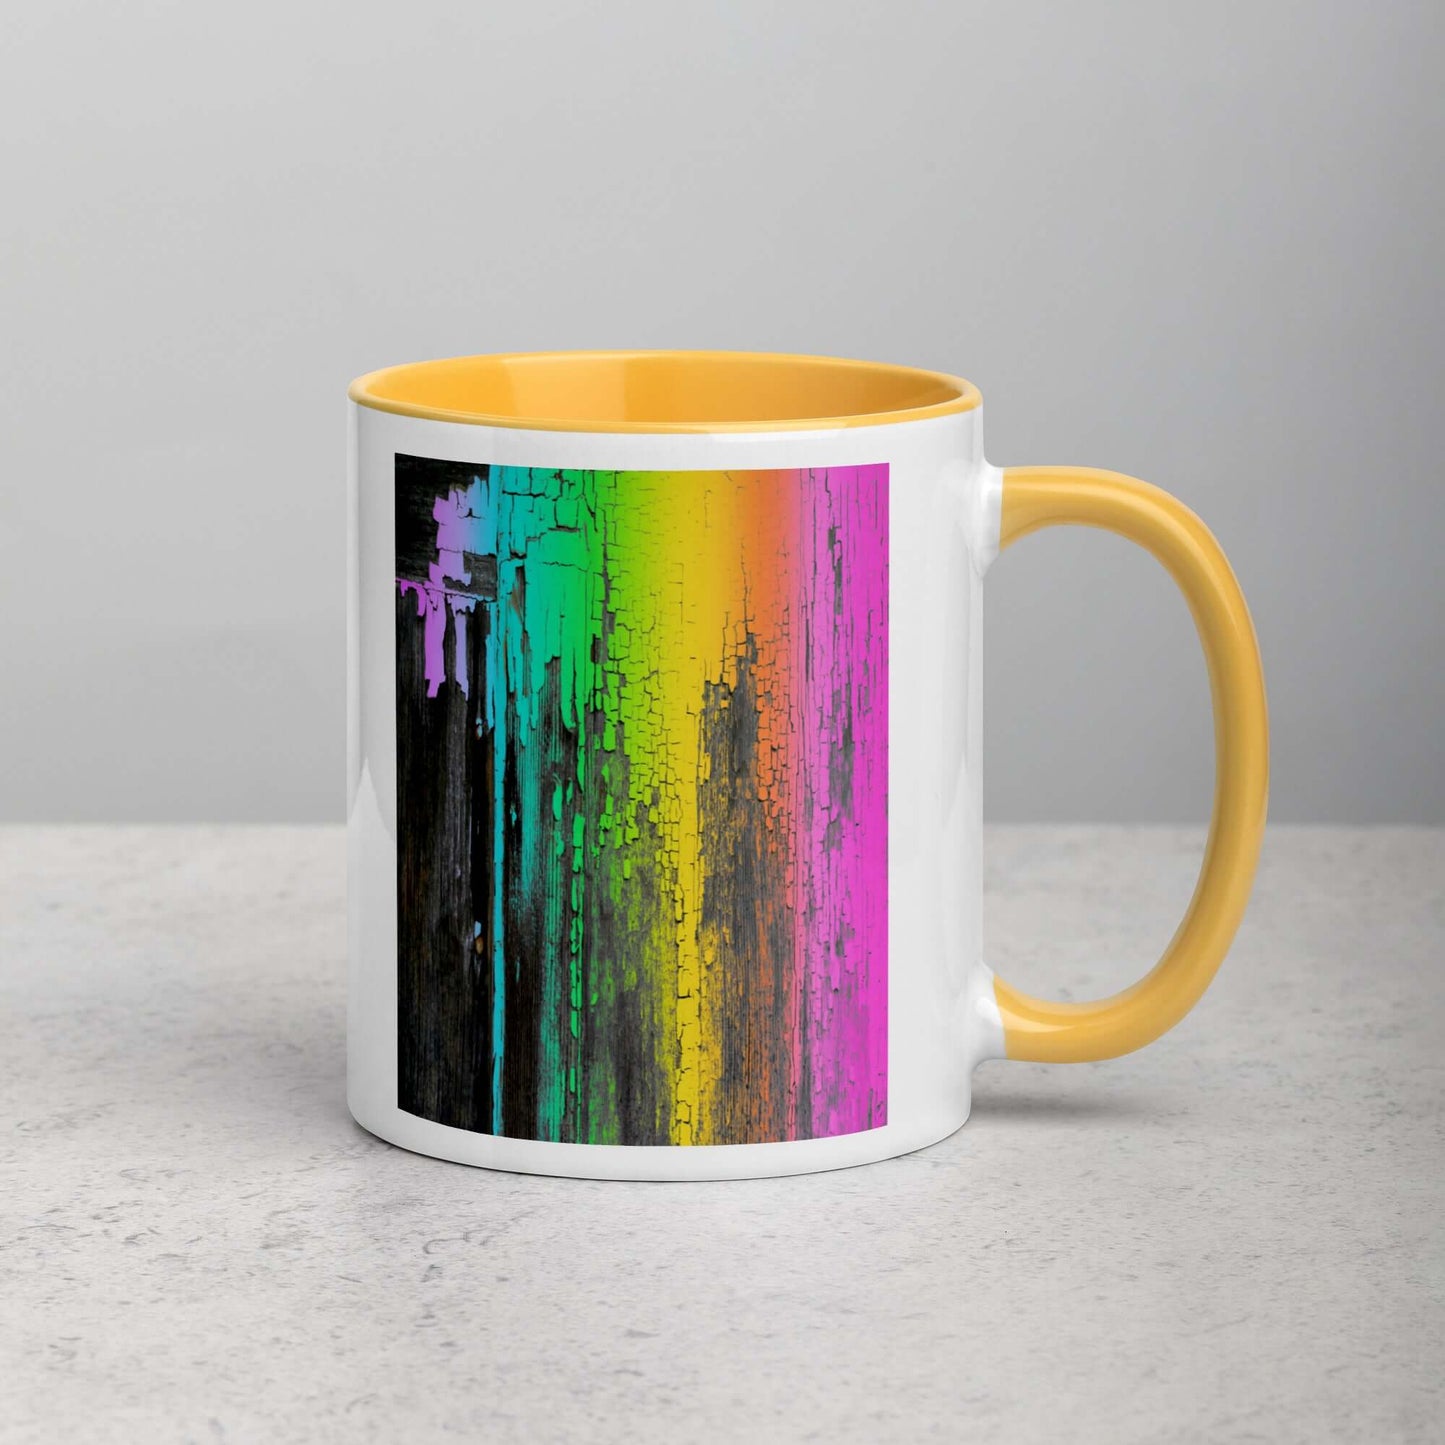 Rainbow Paint Drips on Old Wood “Rainbow Crackle” Mug with Golden Yellow Color Inside Right Handed Front View